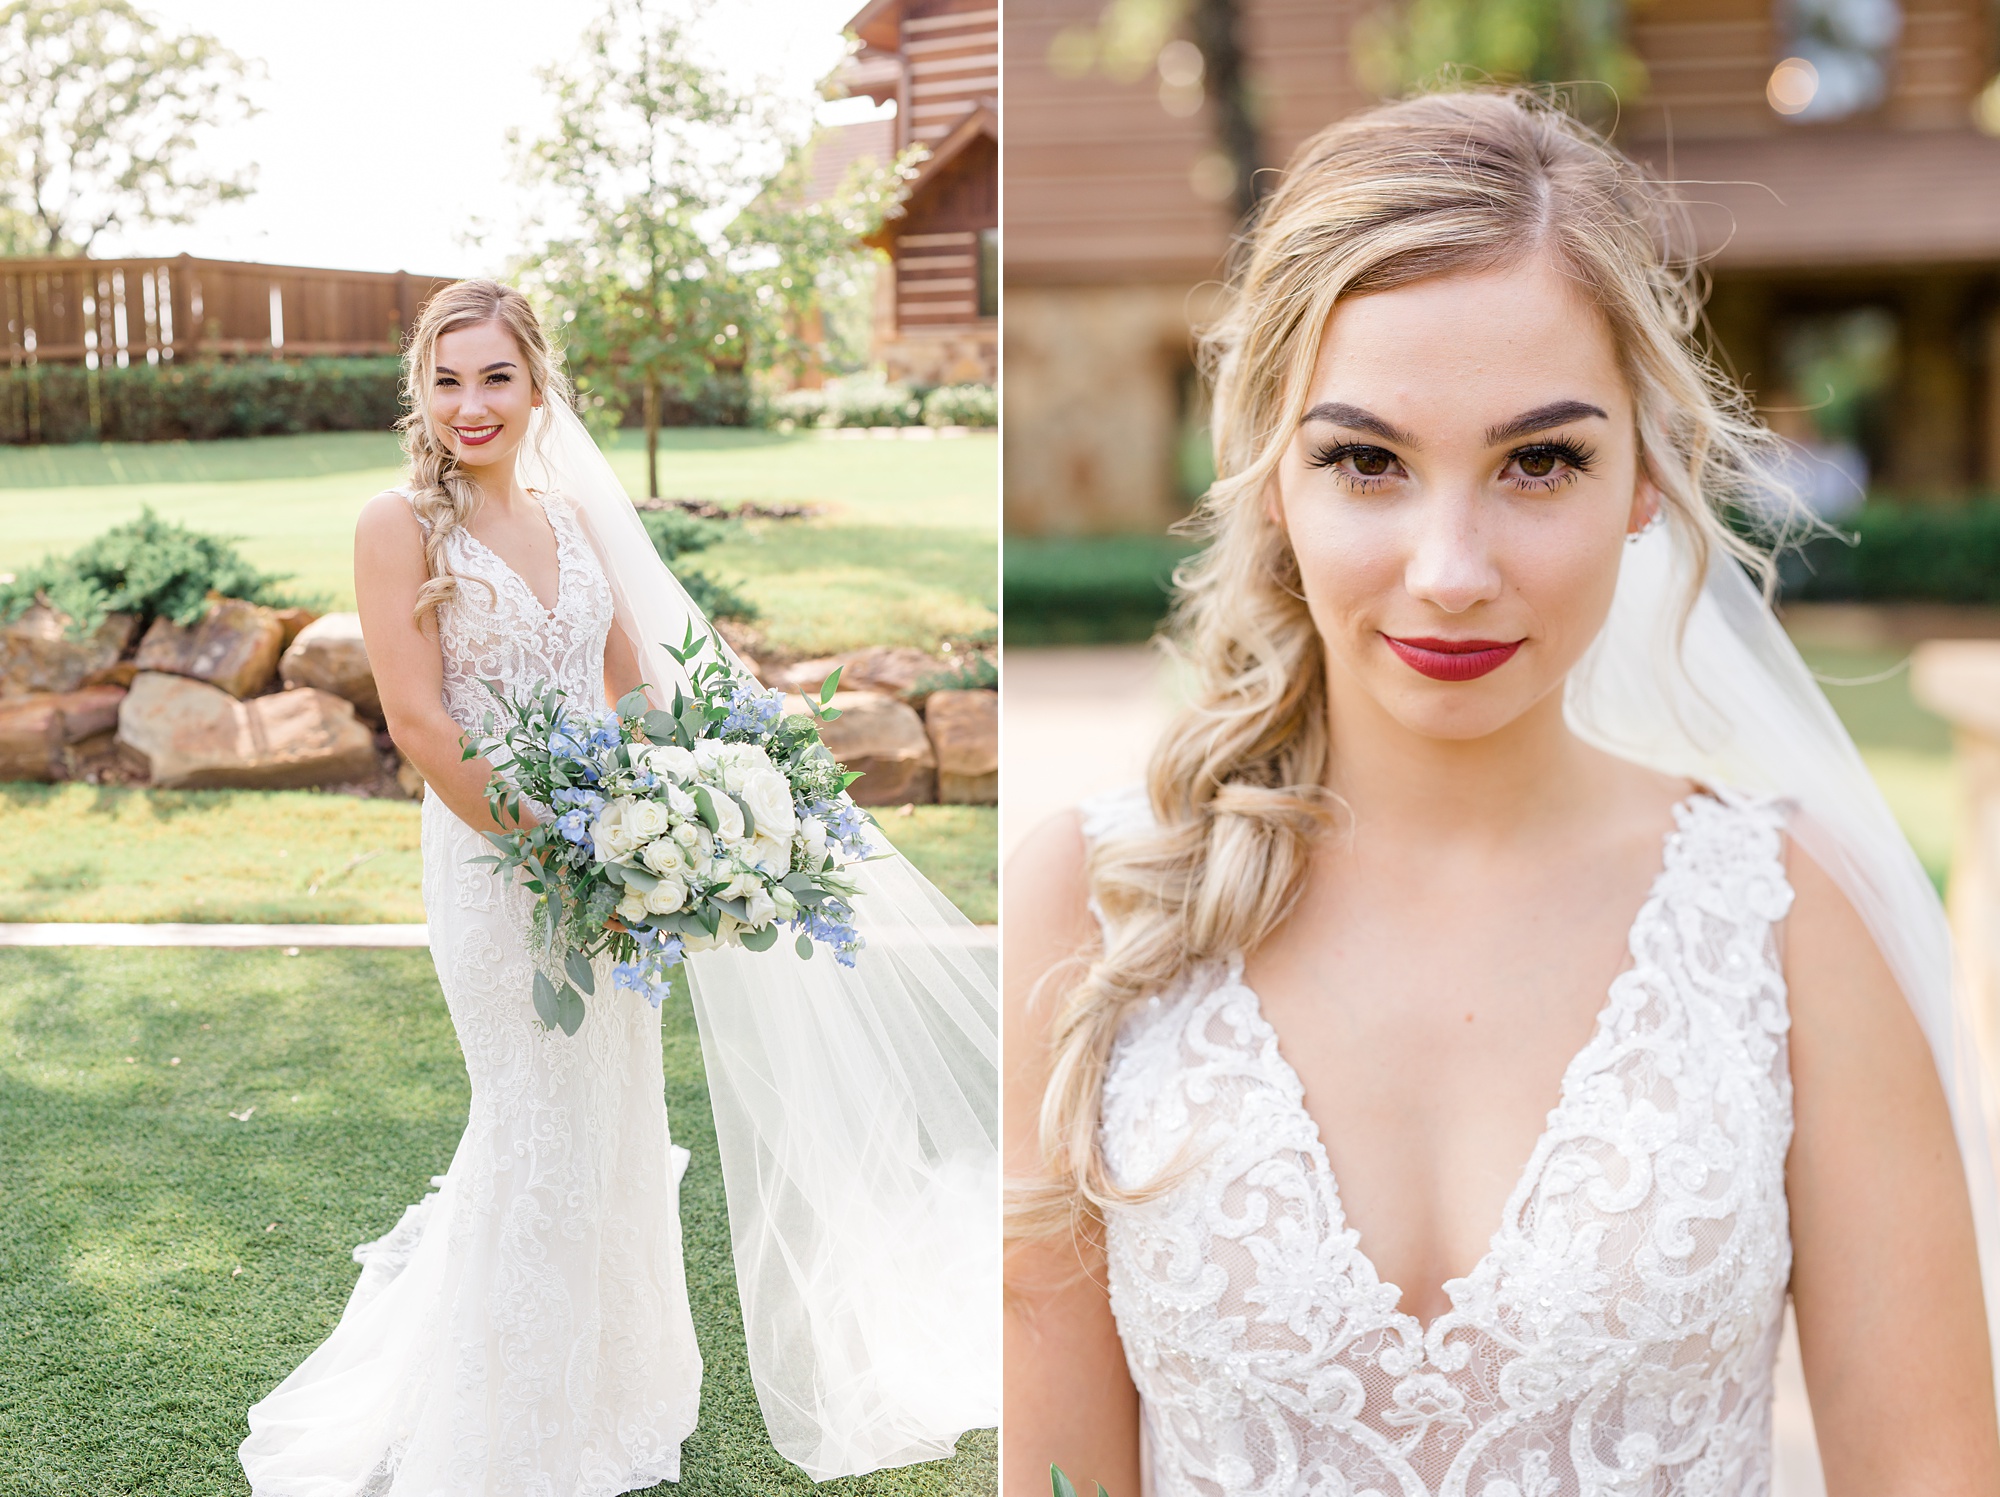 Texas bride with red lipstick and bouquet with white and blue flowers